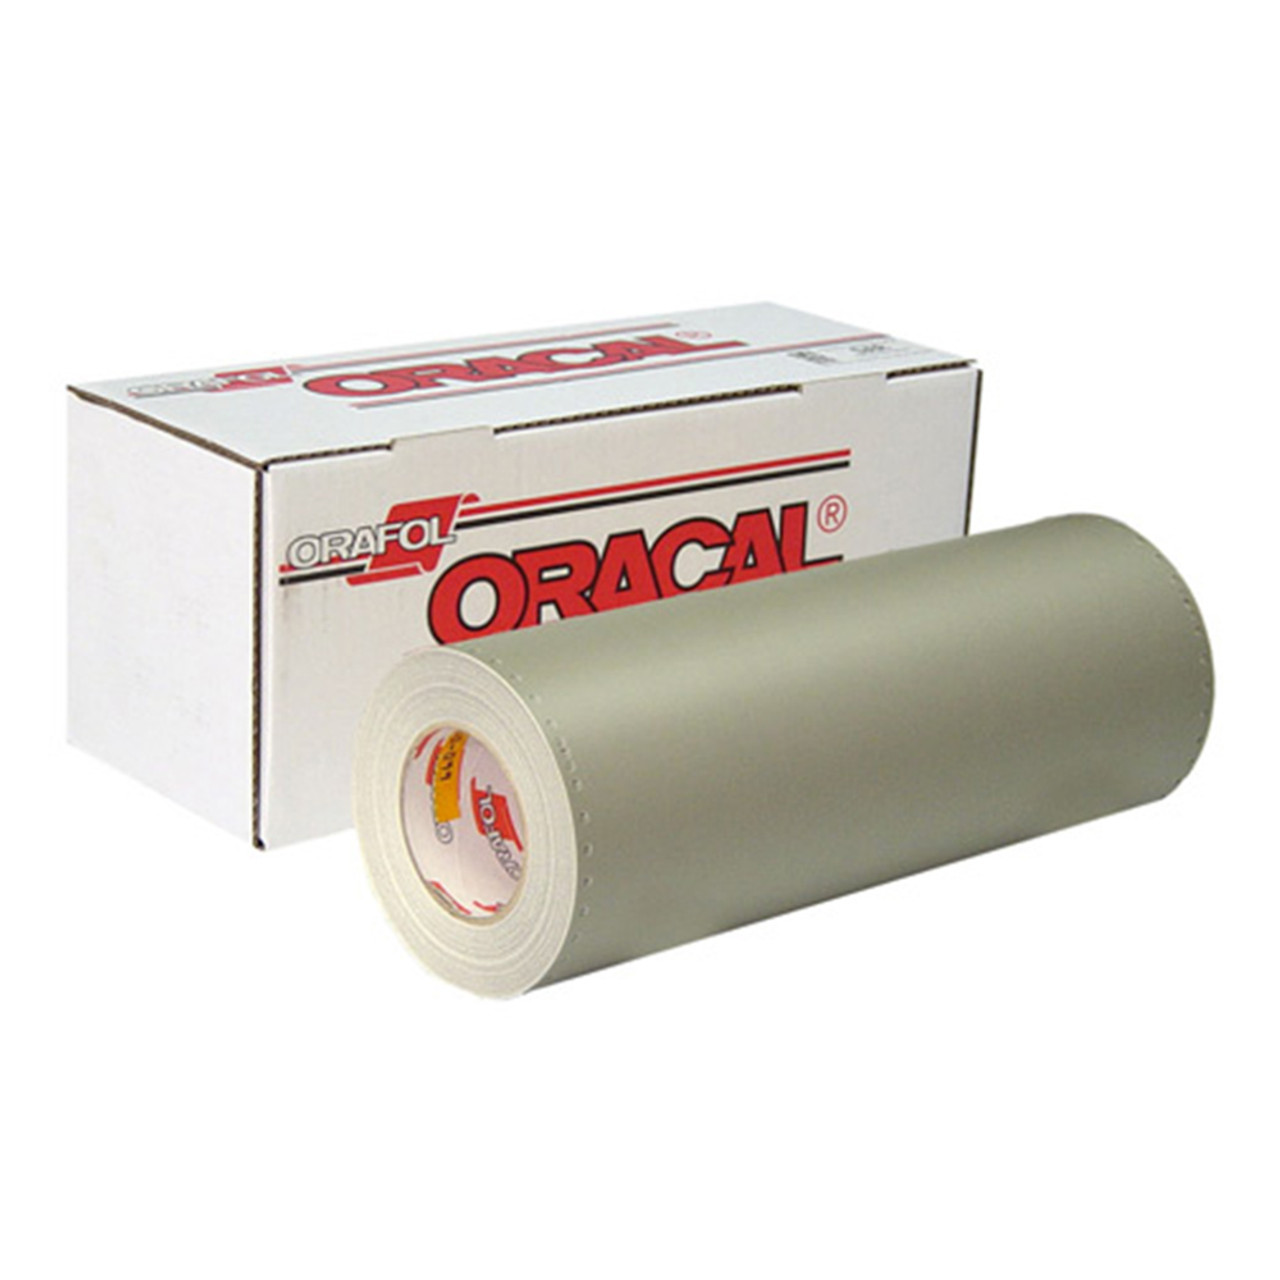 ORAMASK 810 50 Yard Spray Mask Stencil for Water Based Paints